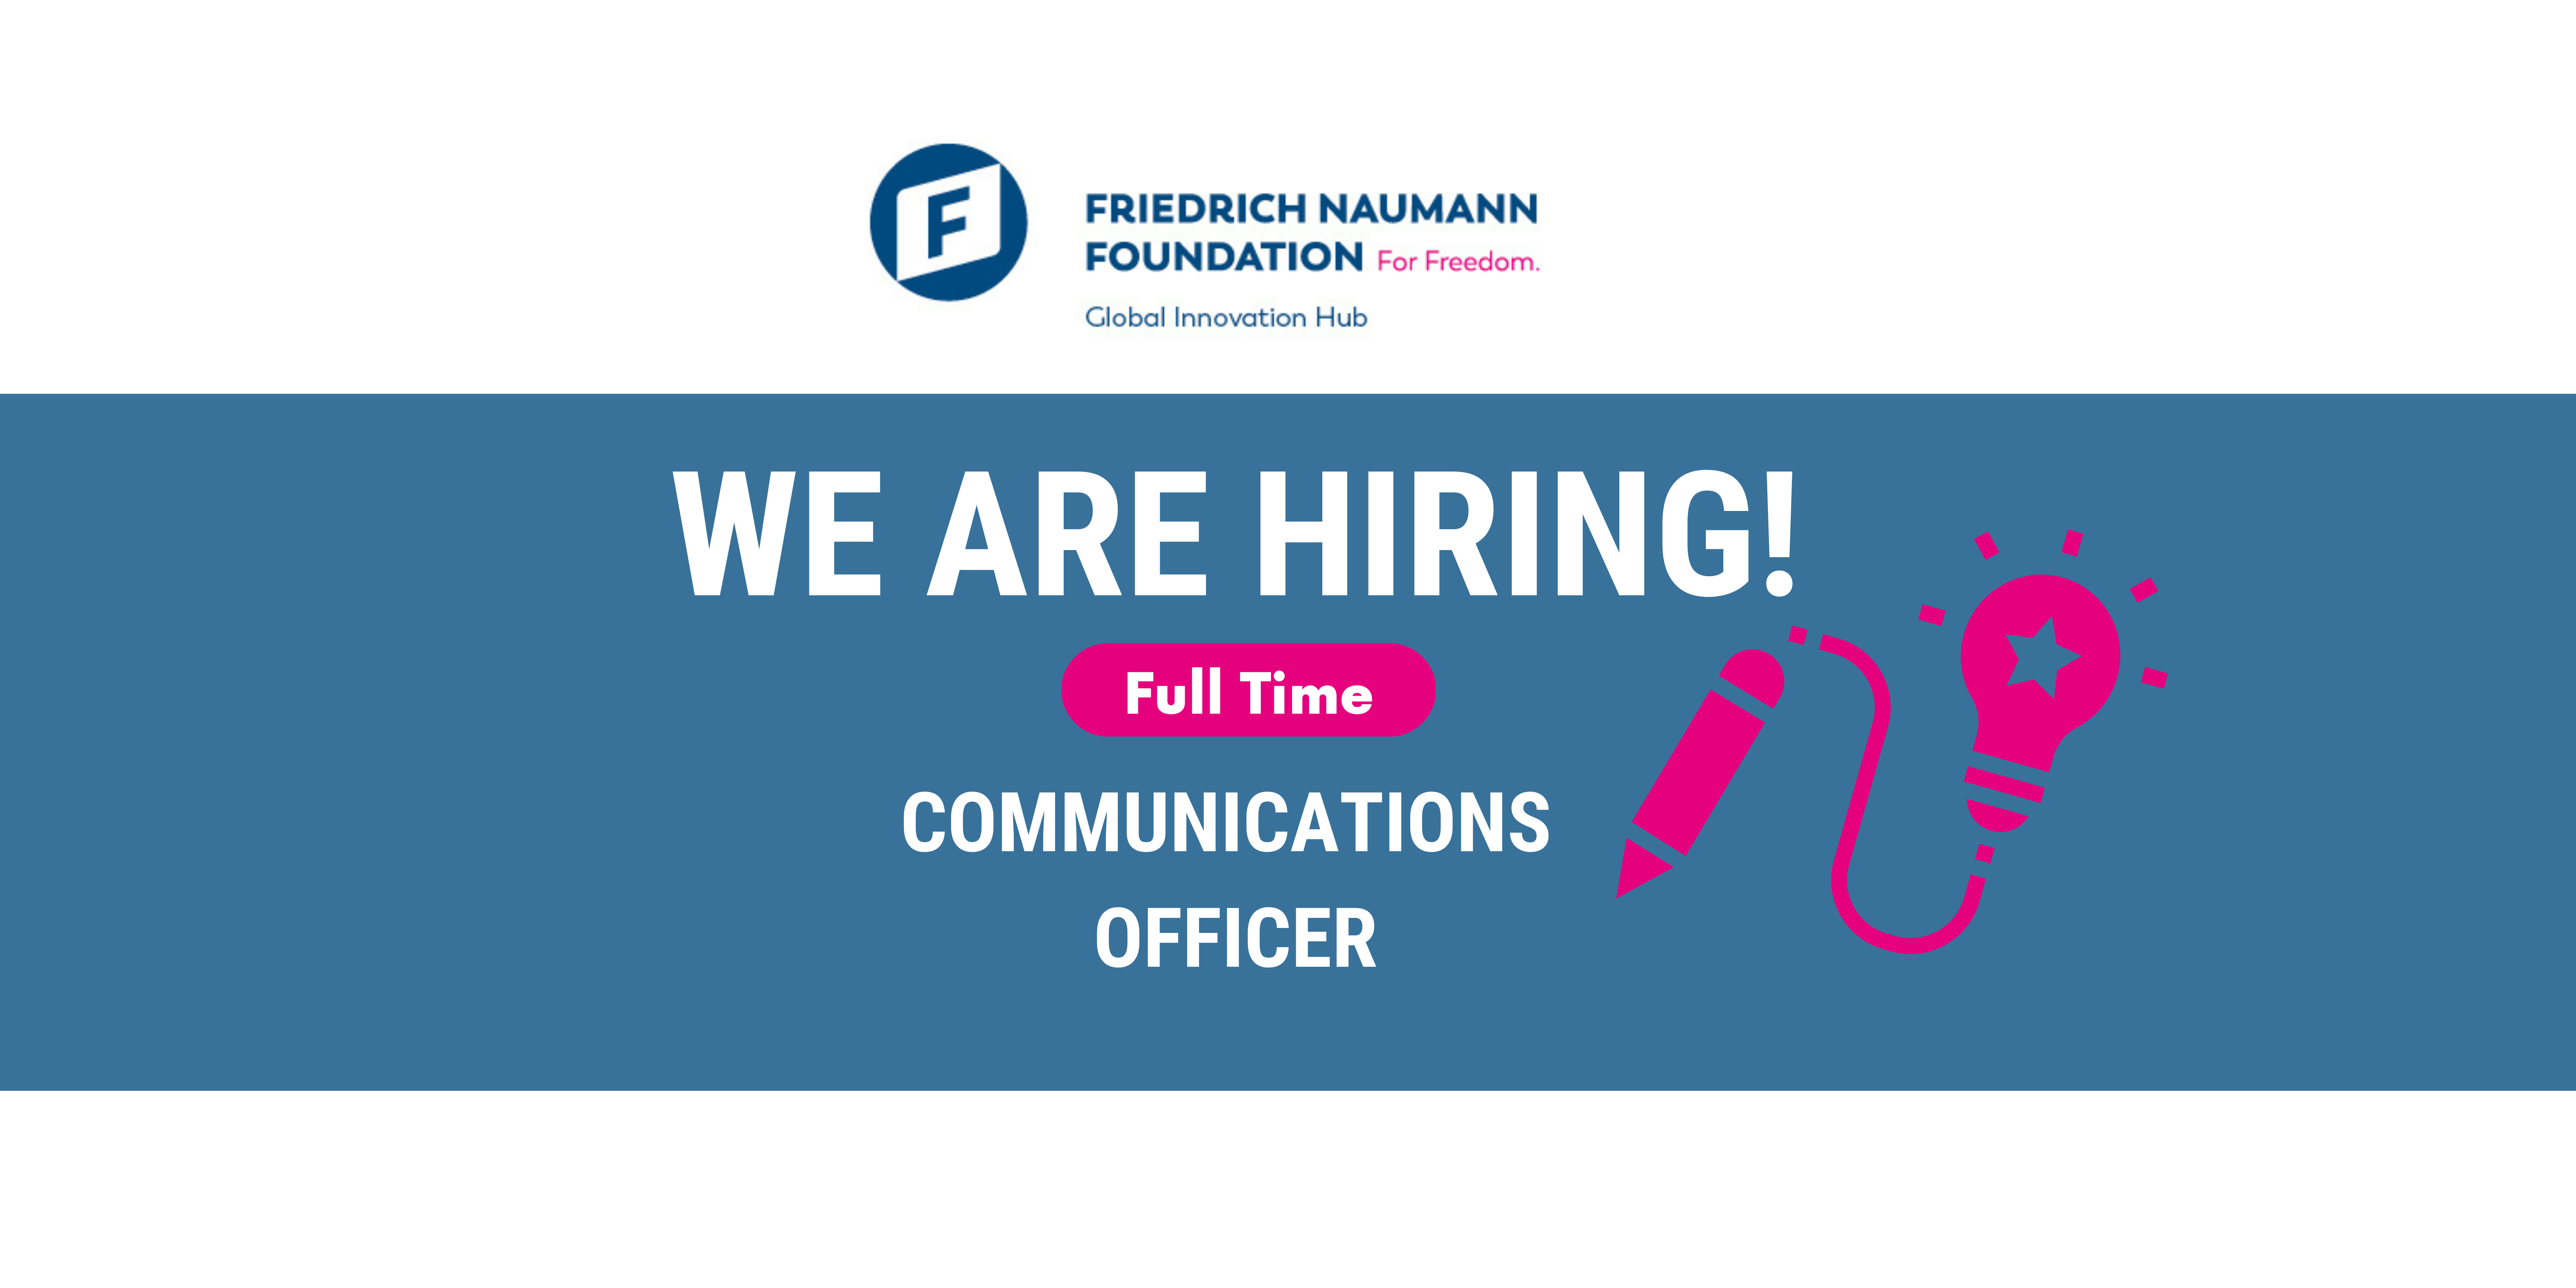 Vacancy Communications Officer